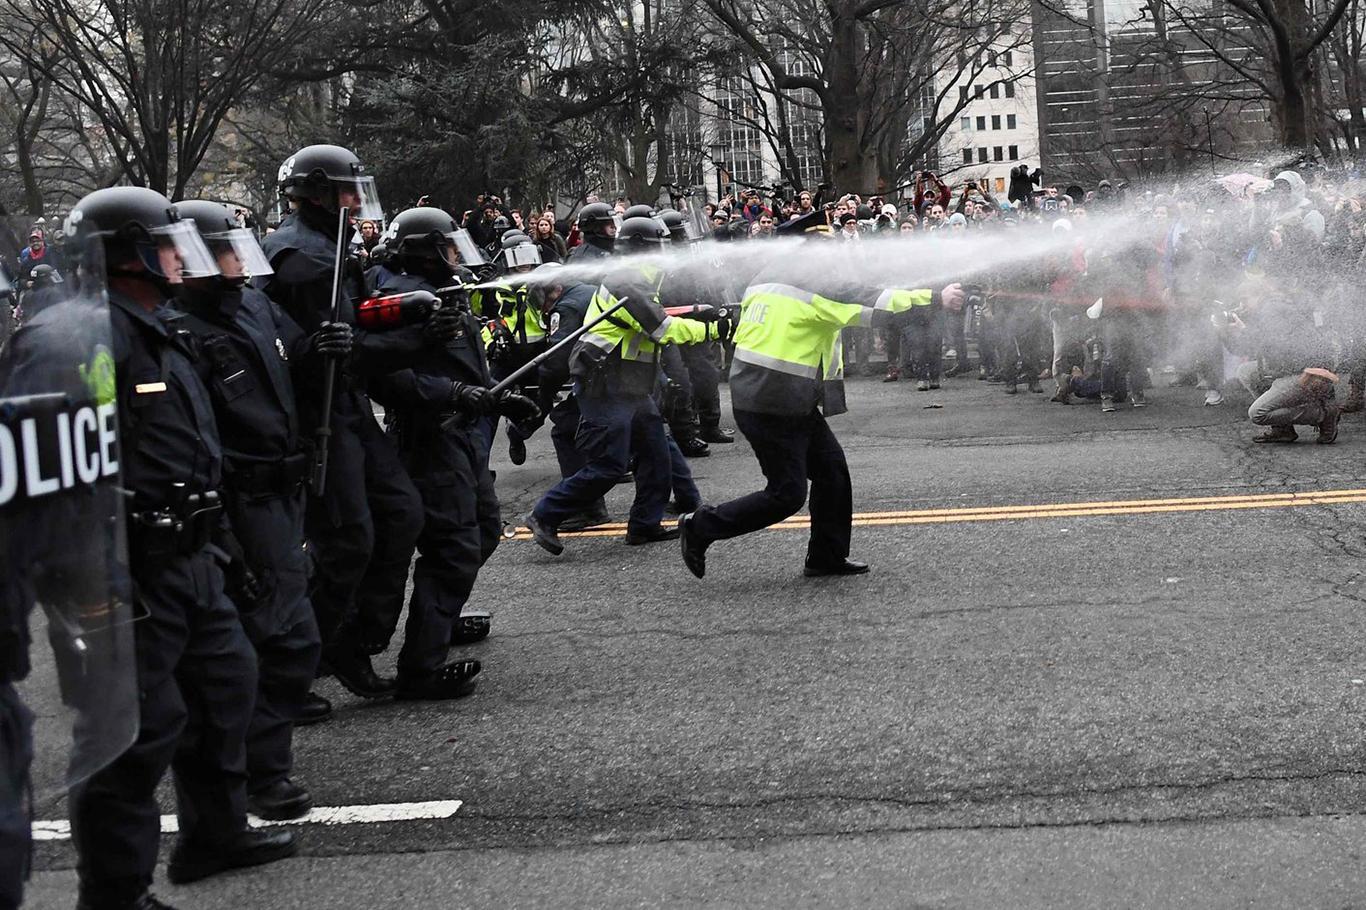 More than 4,000 people arrested during protests in U.S.